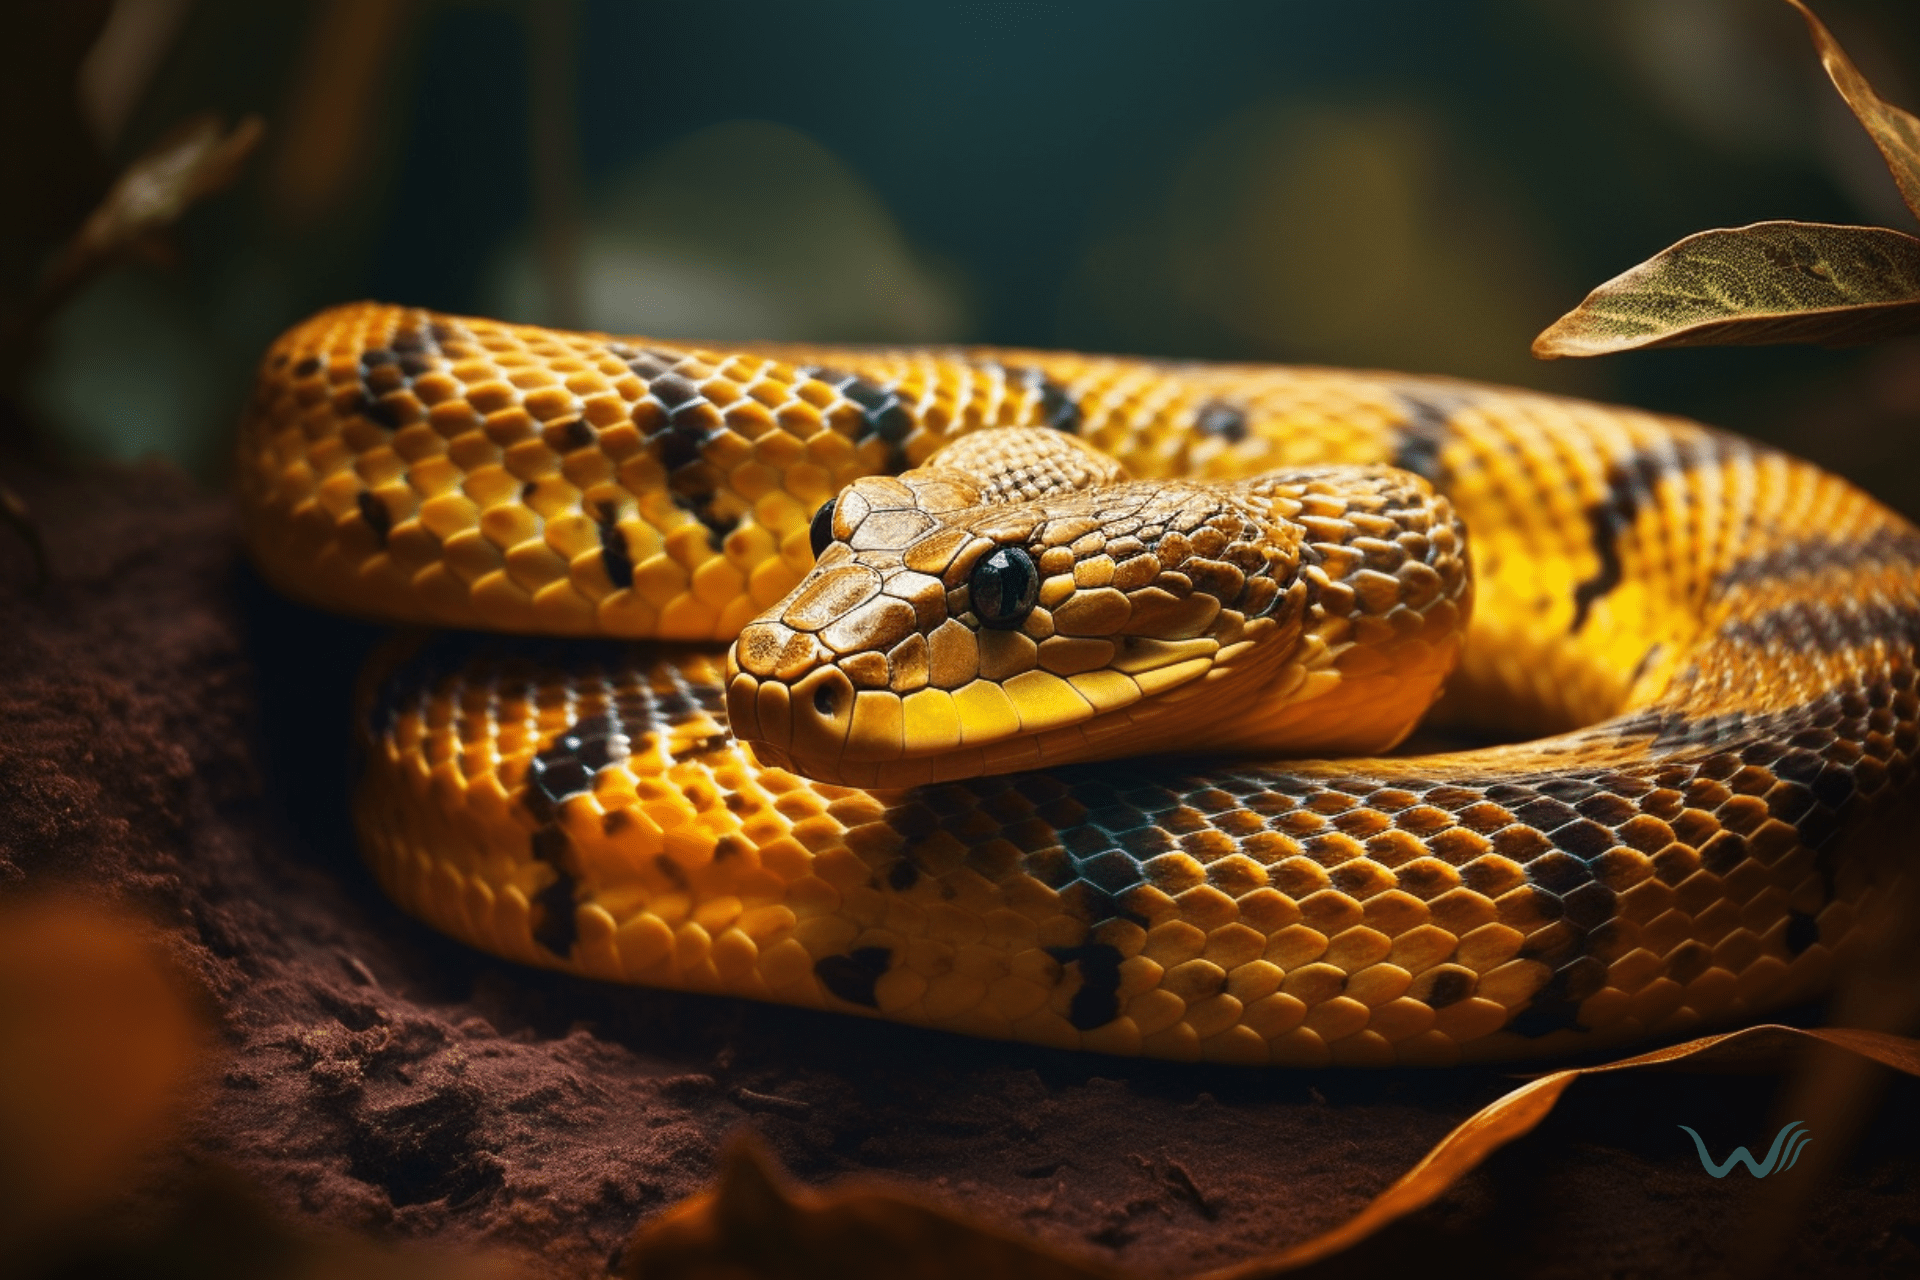 7 intriguing facts about snakes